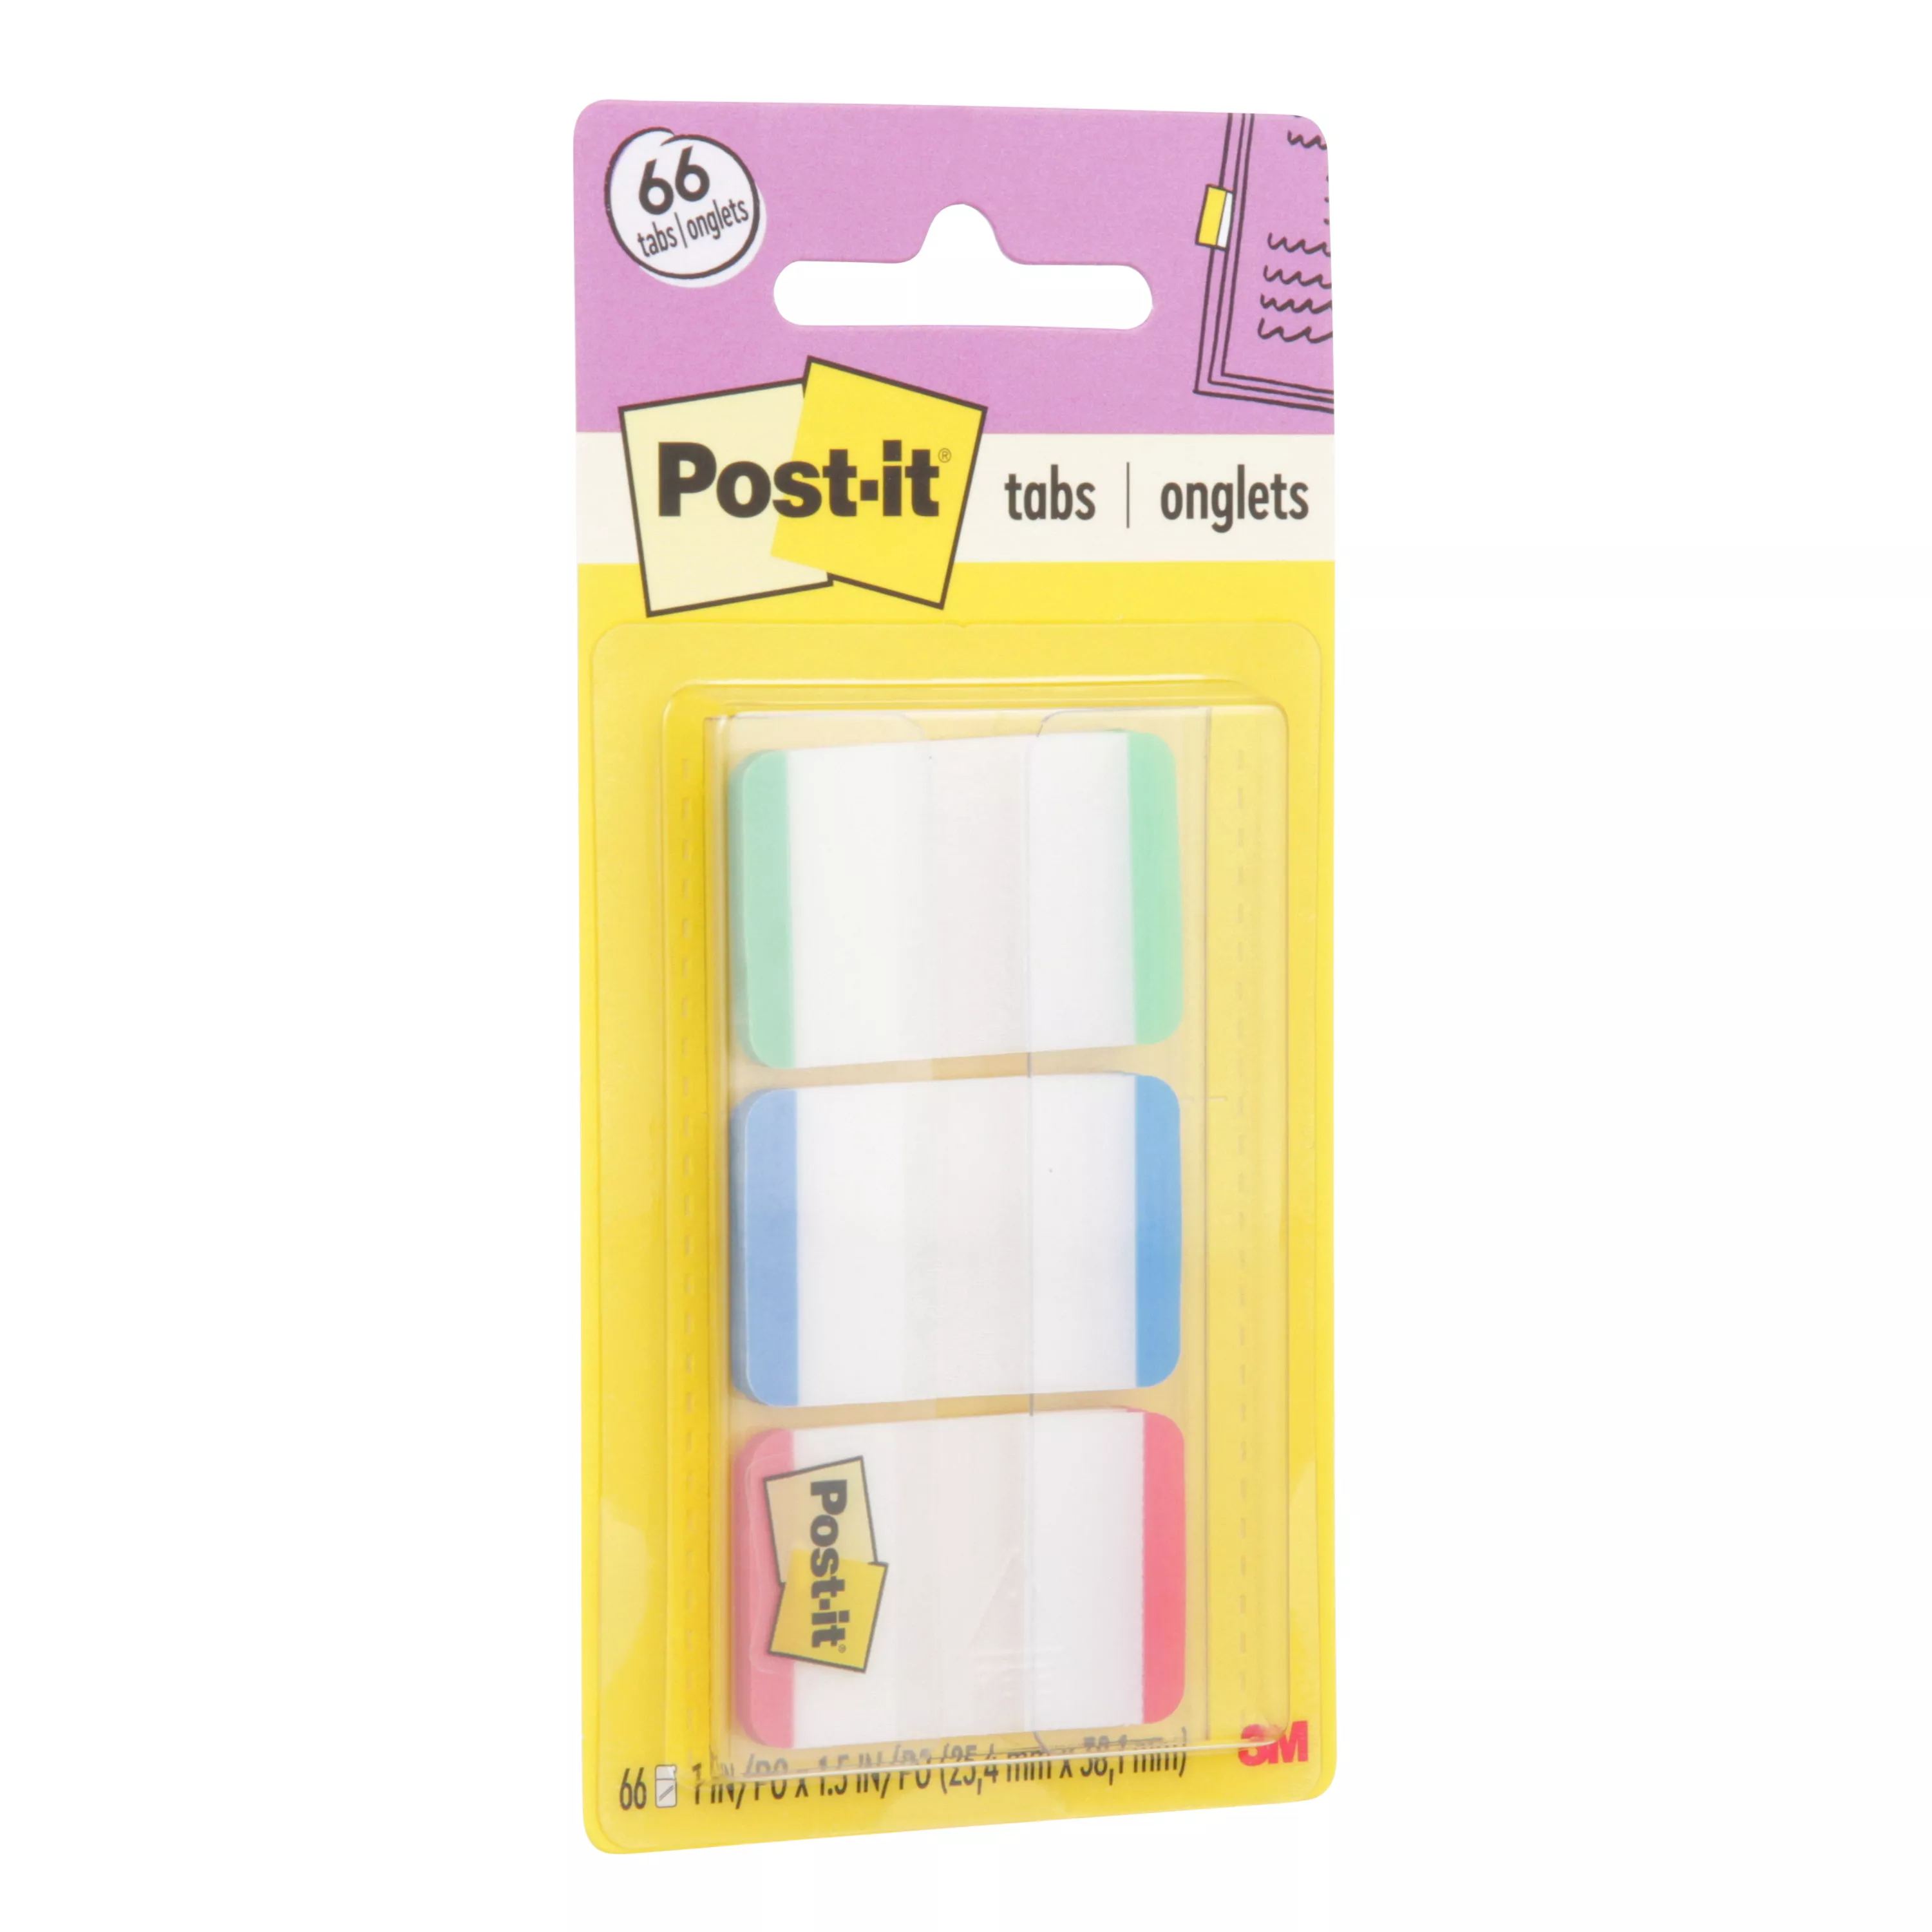 Product Number 686L-GBR | Post-it® Durable Tabs 686L-GBR